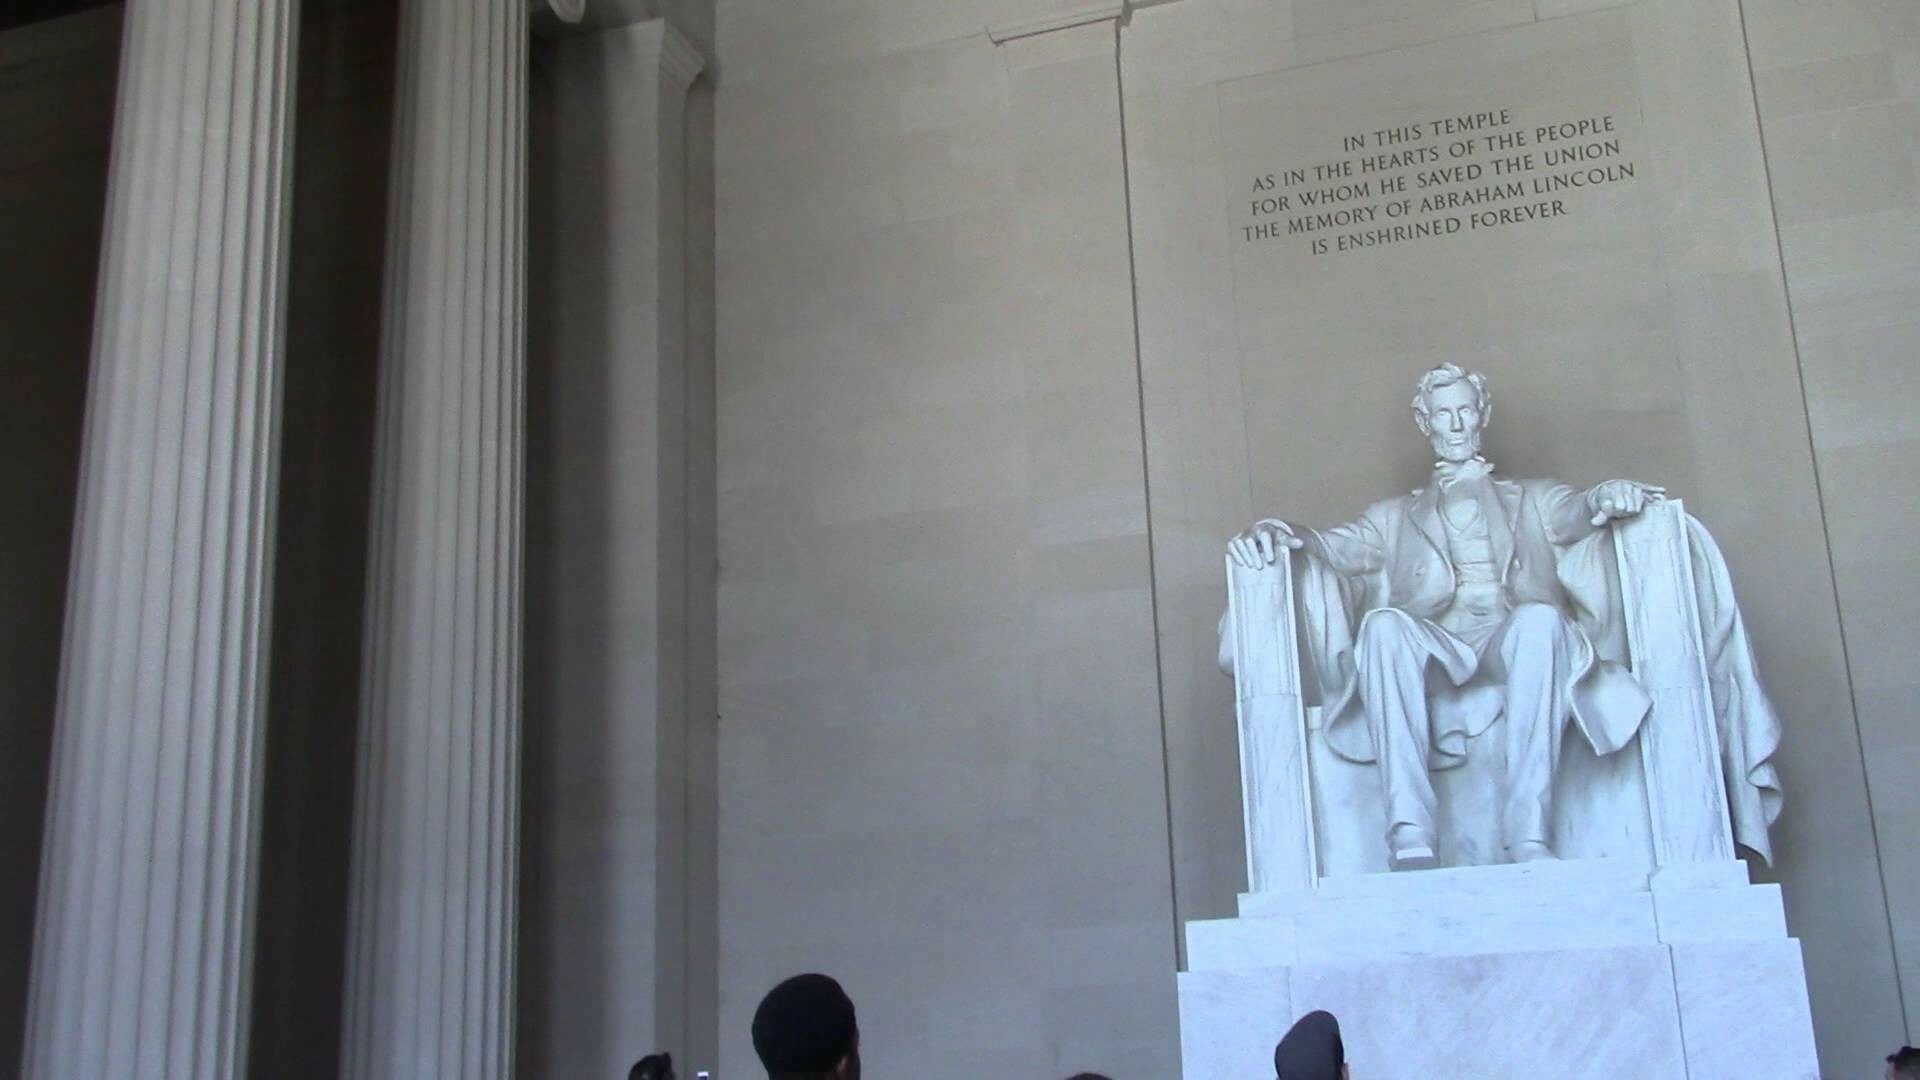 Lincoln Memorial: Seated proudly at the west end of Washington, D.C.'s National Mall, One of the most beloved American monuments. 1920x1080 Full HD Wallpaper.